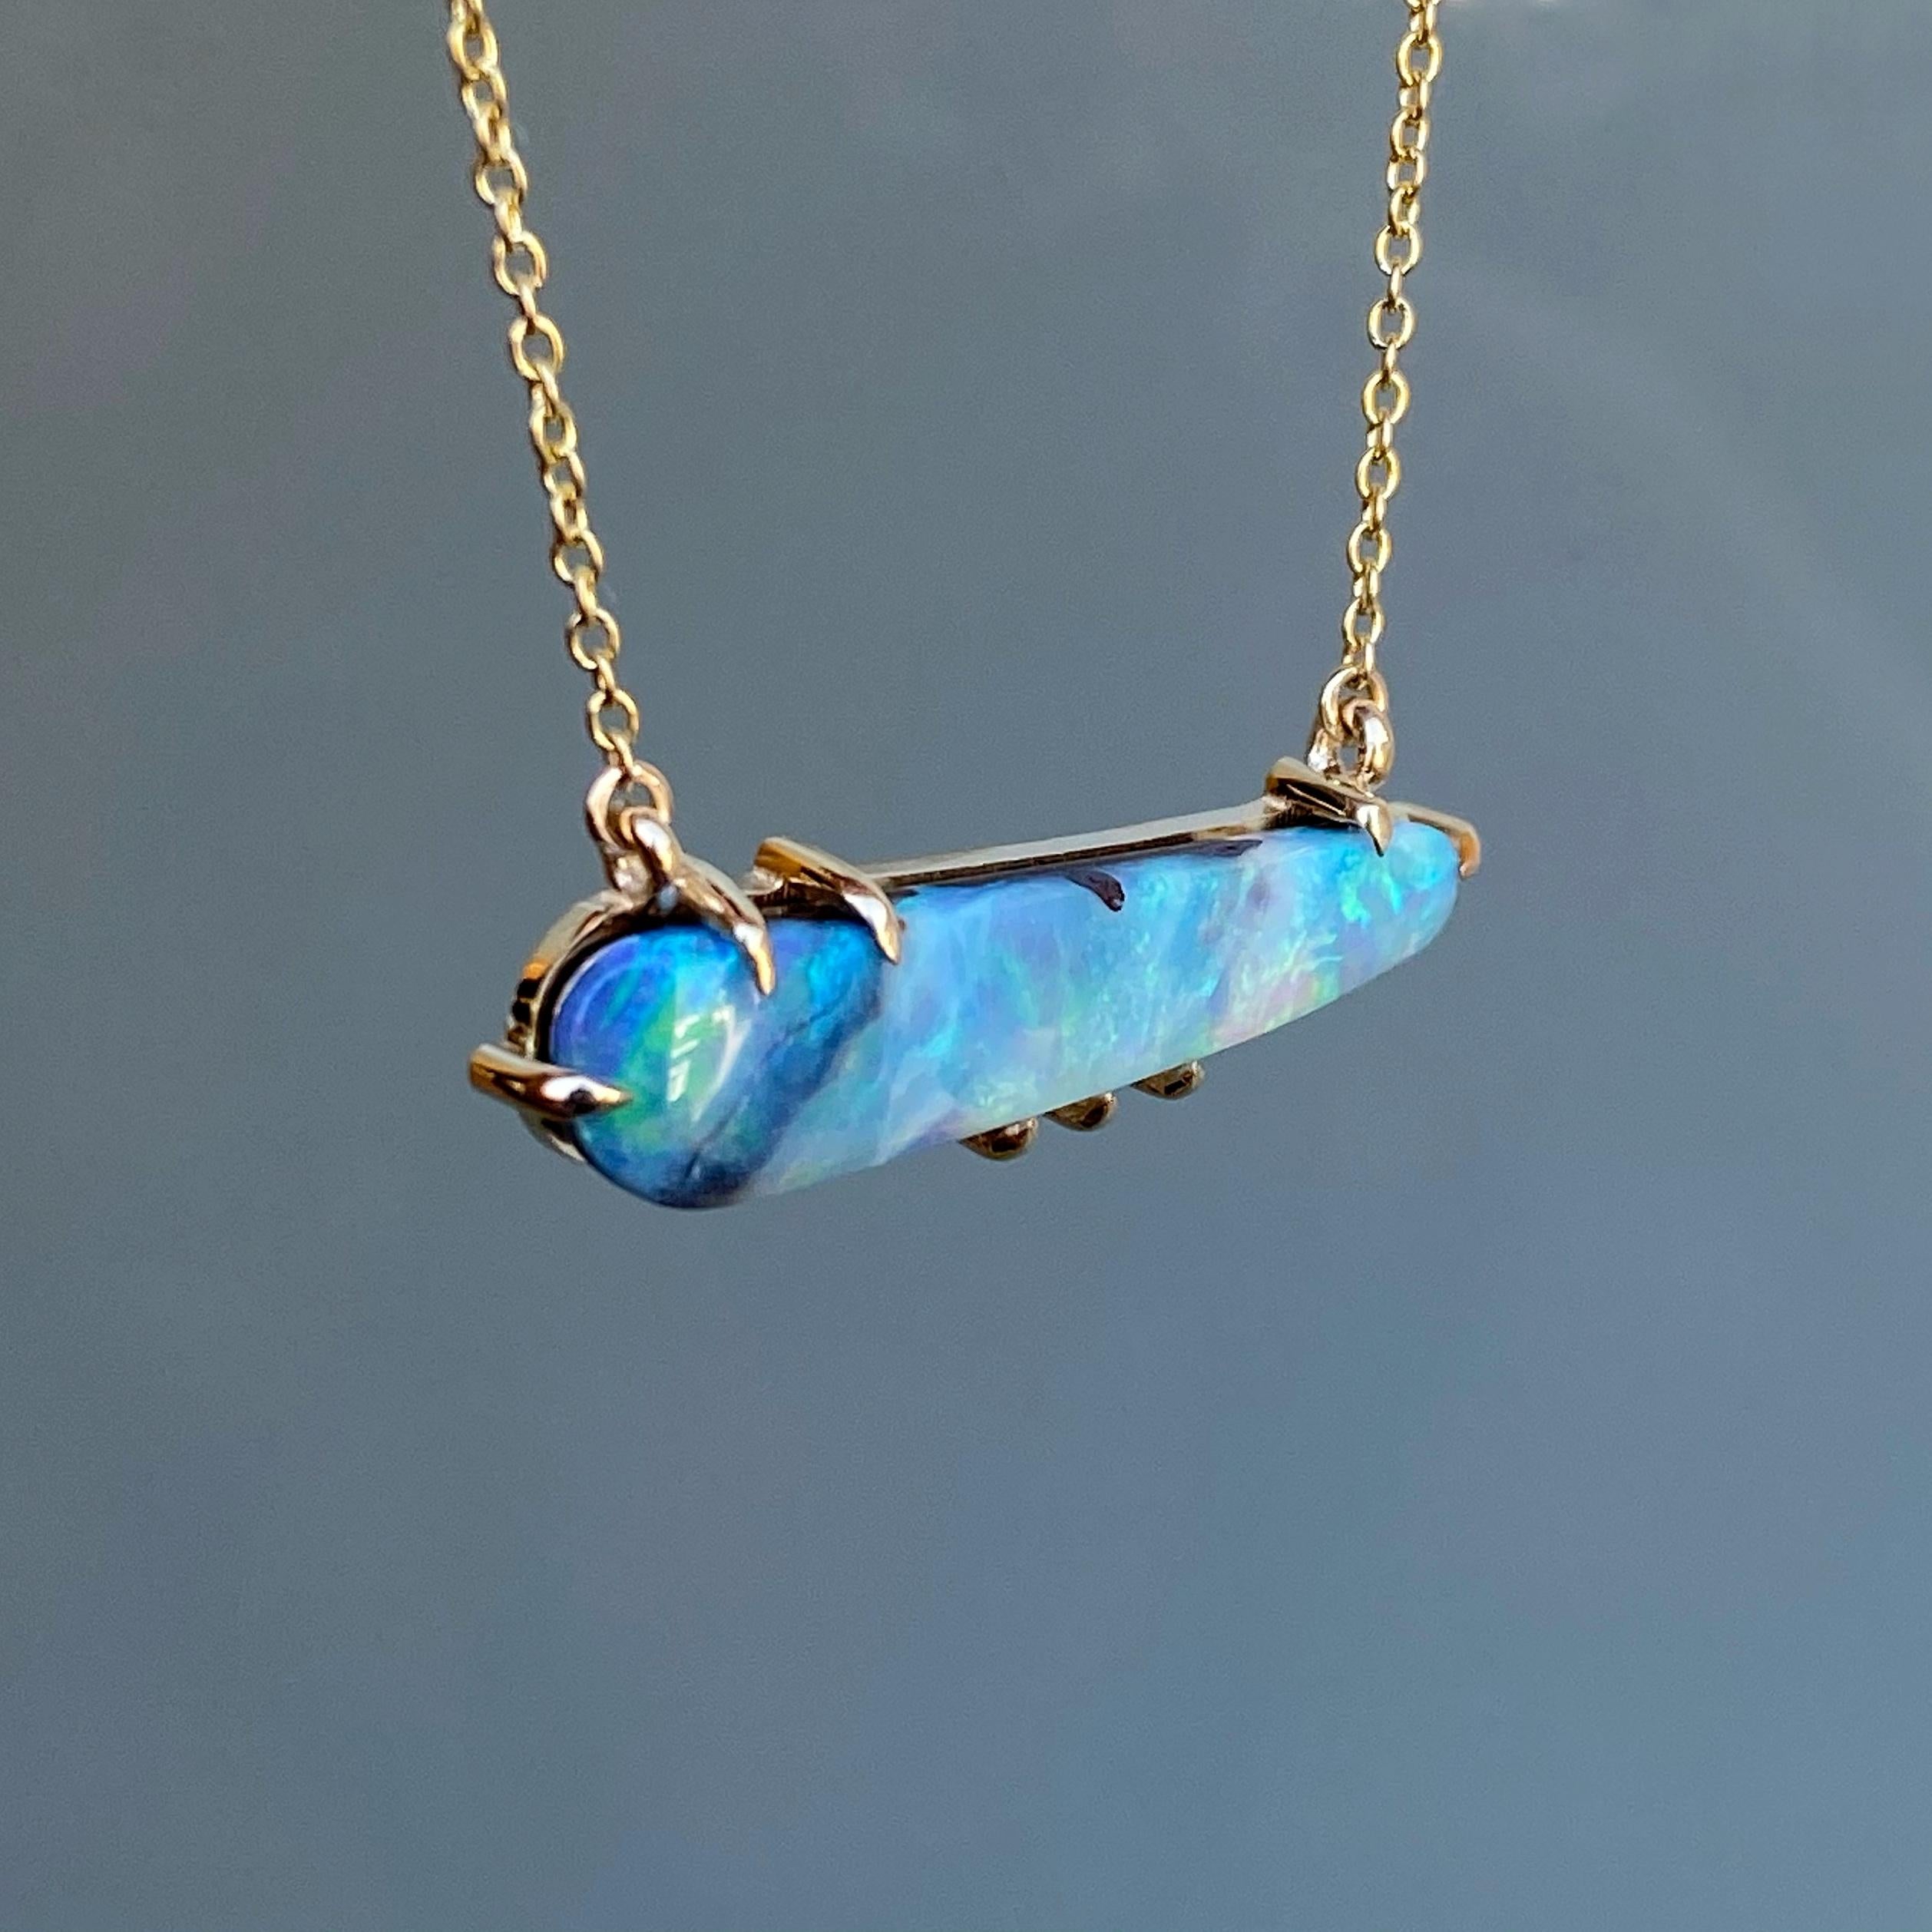 The Winter Flurry Boulder Opal Diamond Station Necklace carefully grips an elongated Boulder Opal...inside of which exists a beautiful winter scene.  This semi-translucent stone oscillates from deep stormy blues to bright turquoise skies, with the